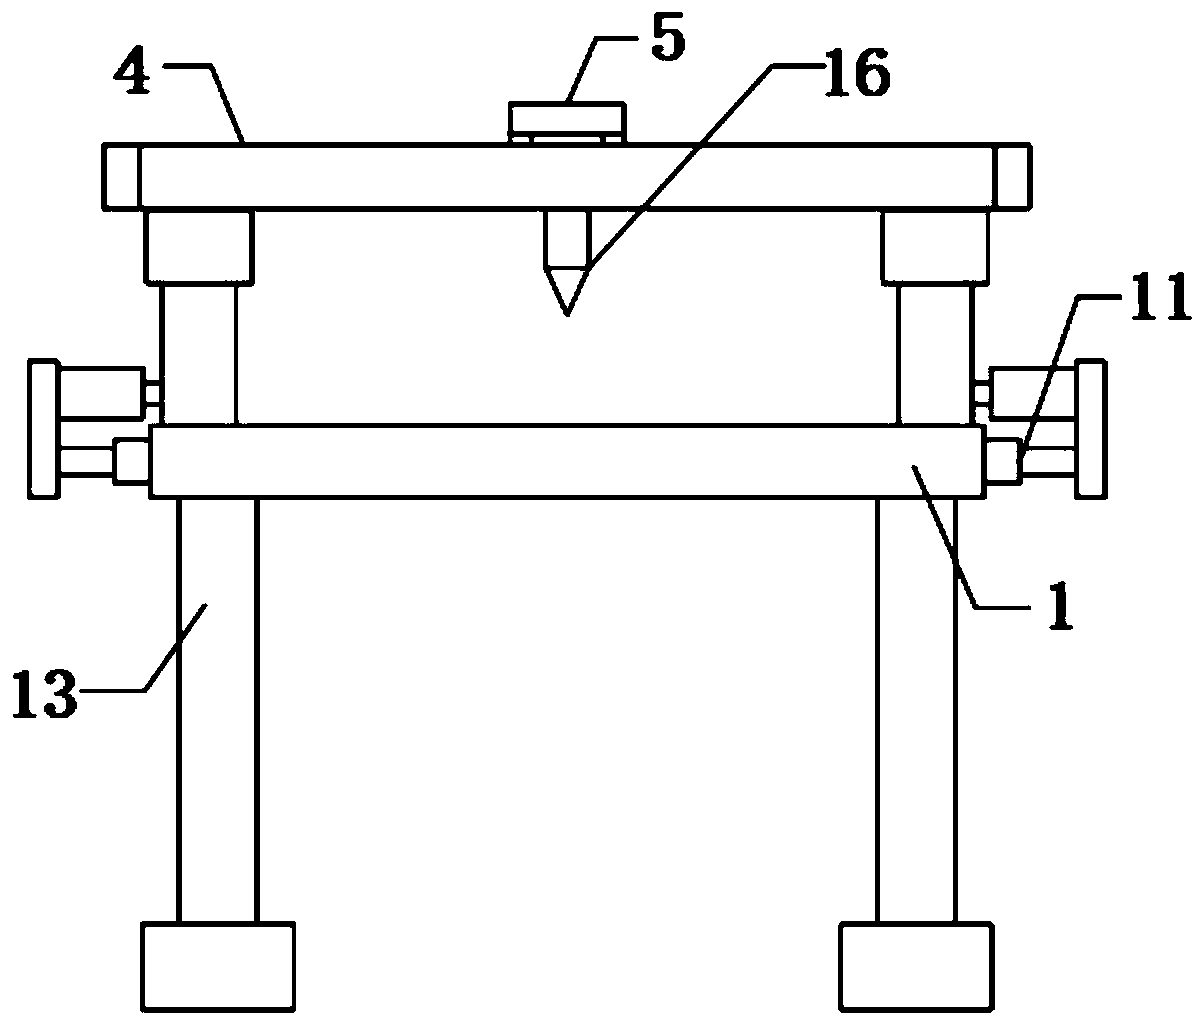 Nailing device used for furniture production